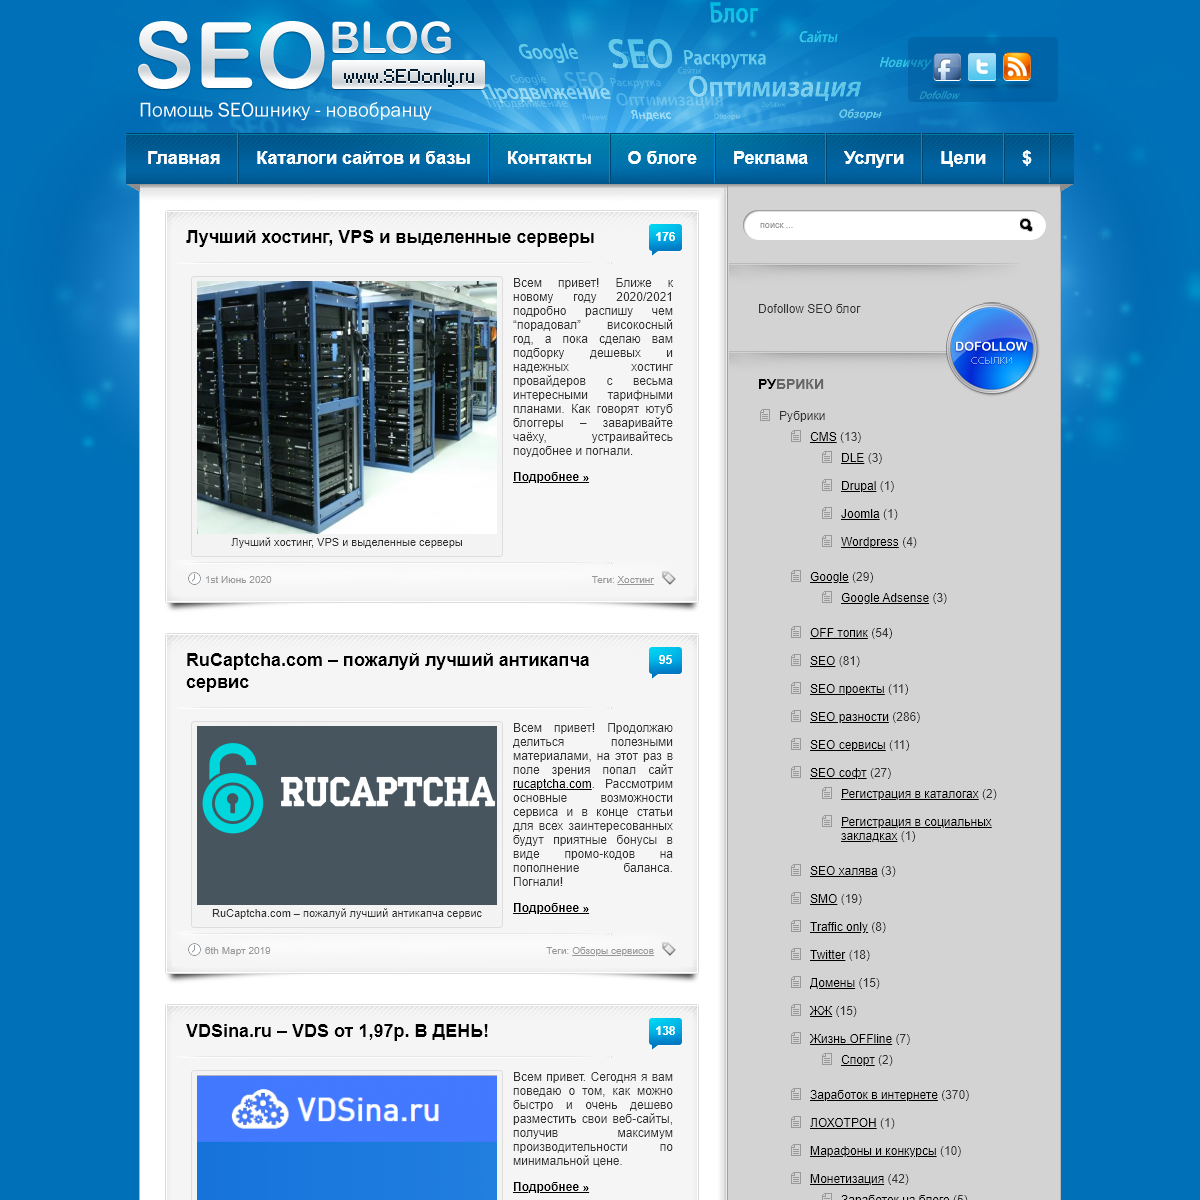 A complete backup of seoonly.ru